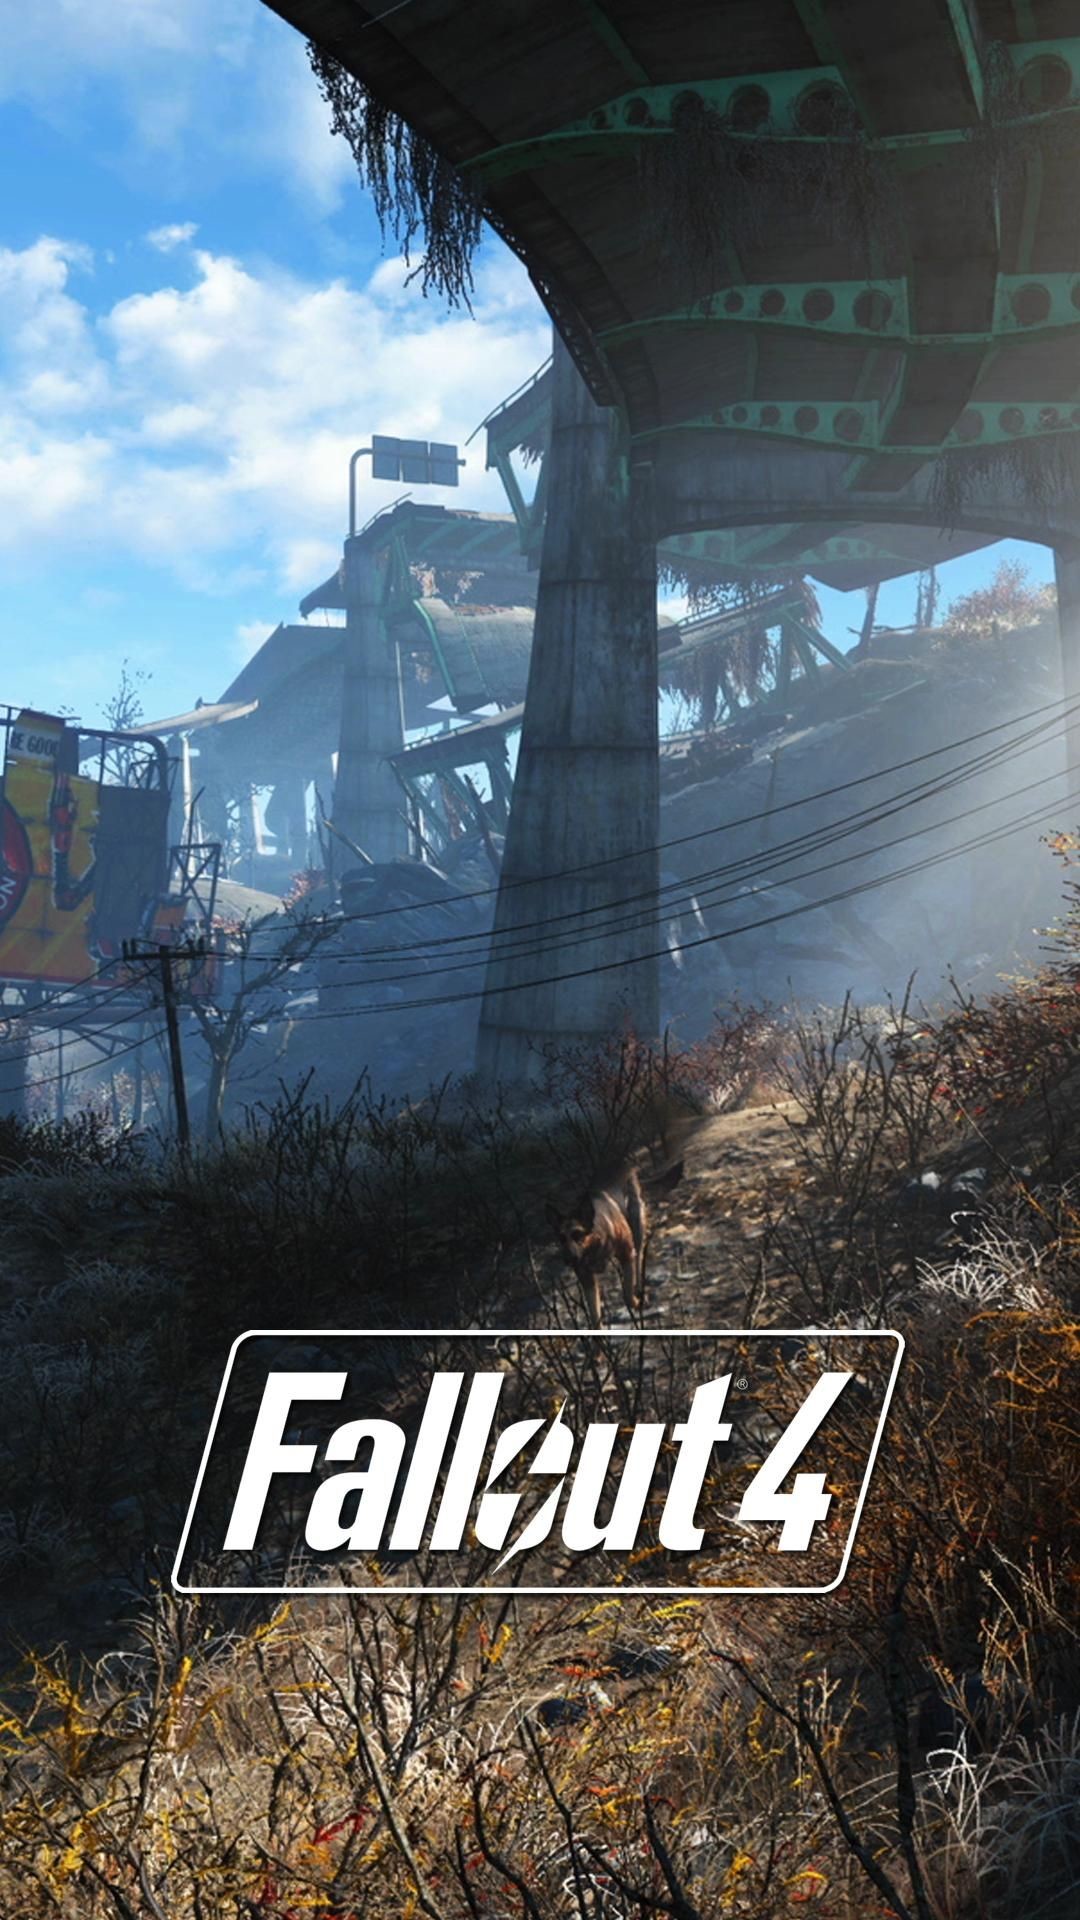 1080x1920 I made some Fallout 4 lock screen wallpapers from E3 stills - Imgur